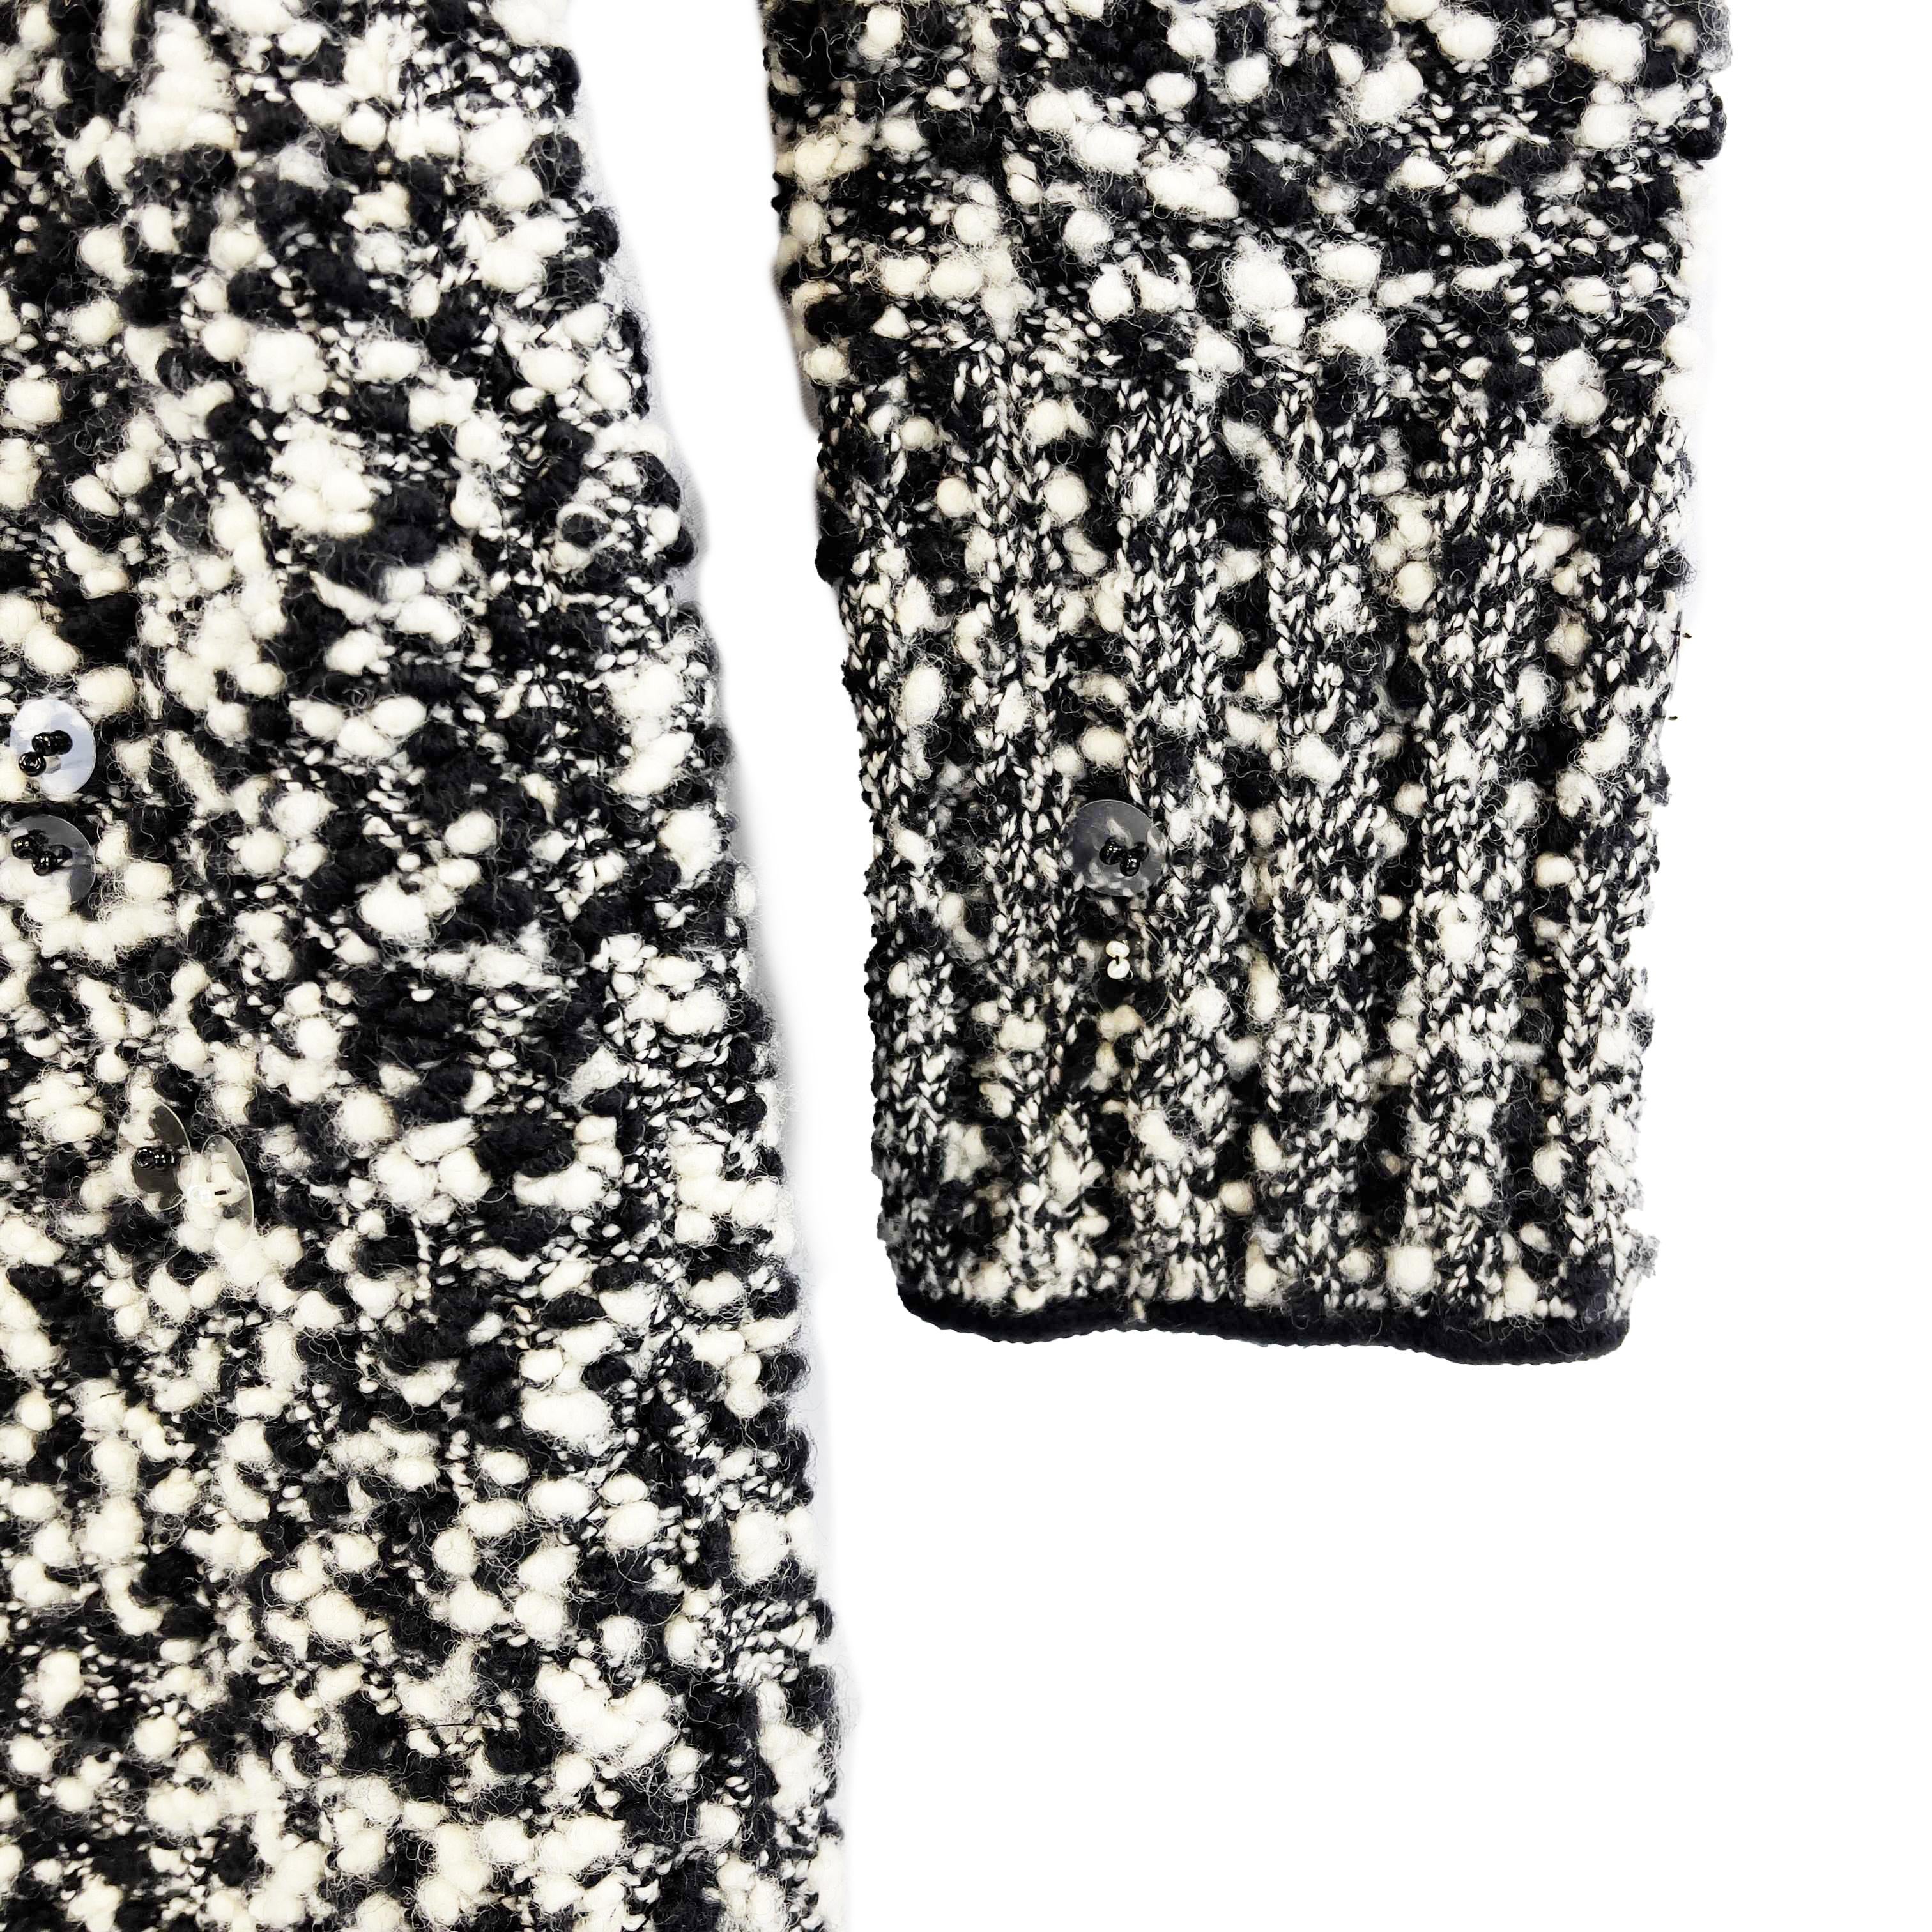 	CHANEL - 94A Knit Clear Sequin Dress - Black & White - 38 US 6 In Excellent Condition For Sale In Sanford, FL